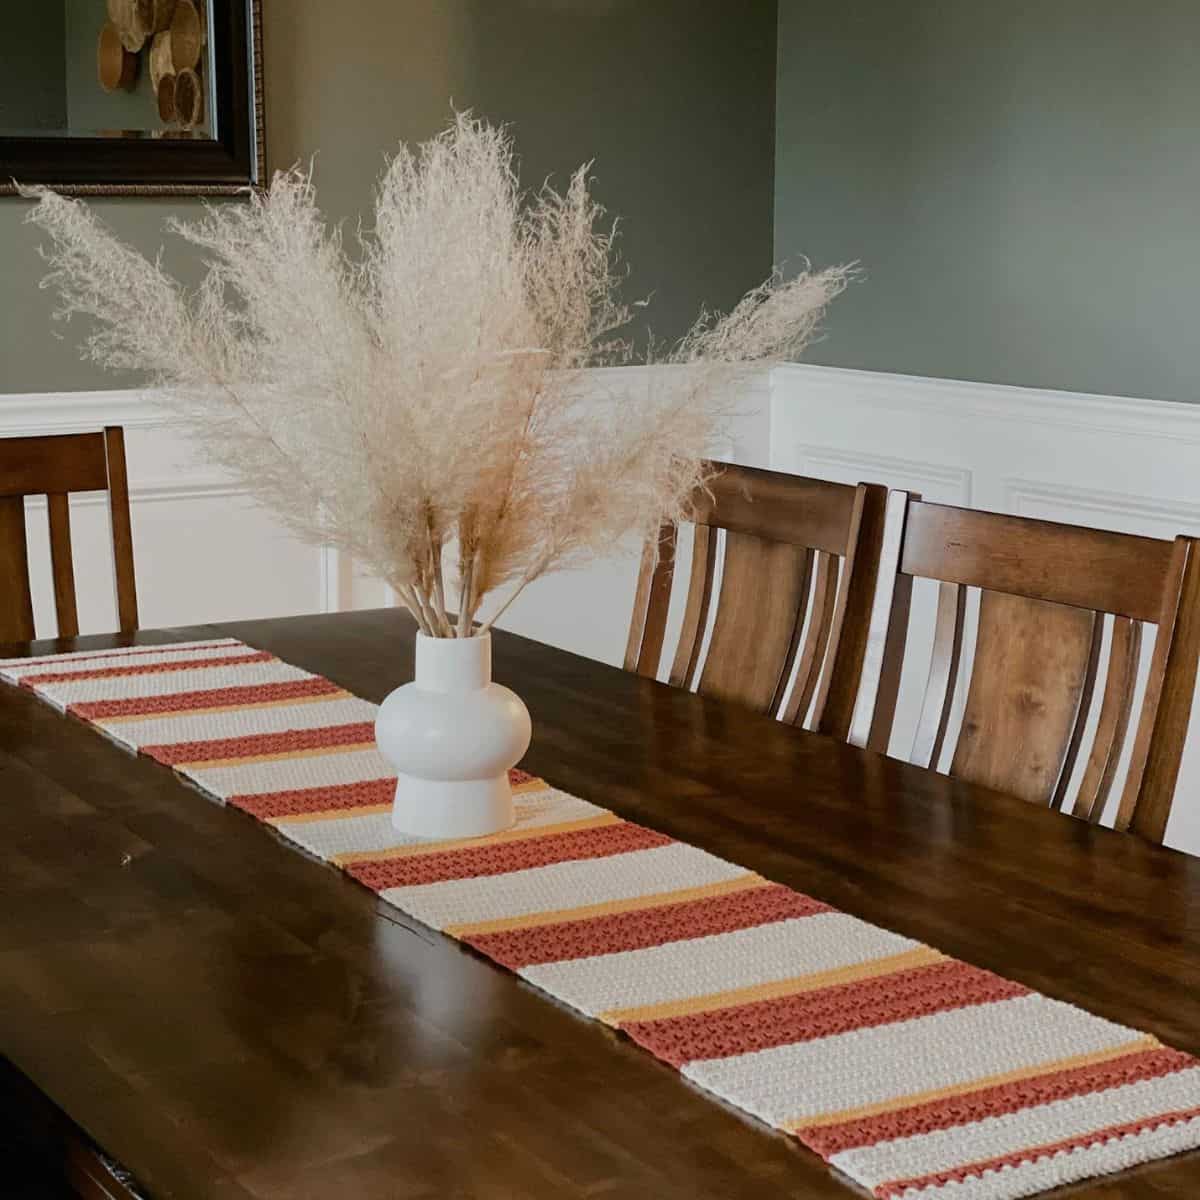 table with a long striped crochet table runner and vase as the centerpiece